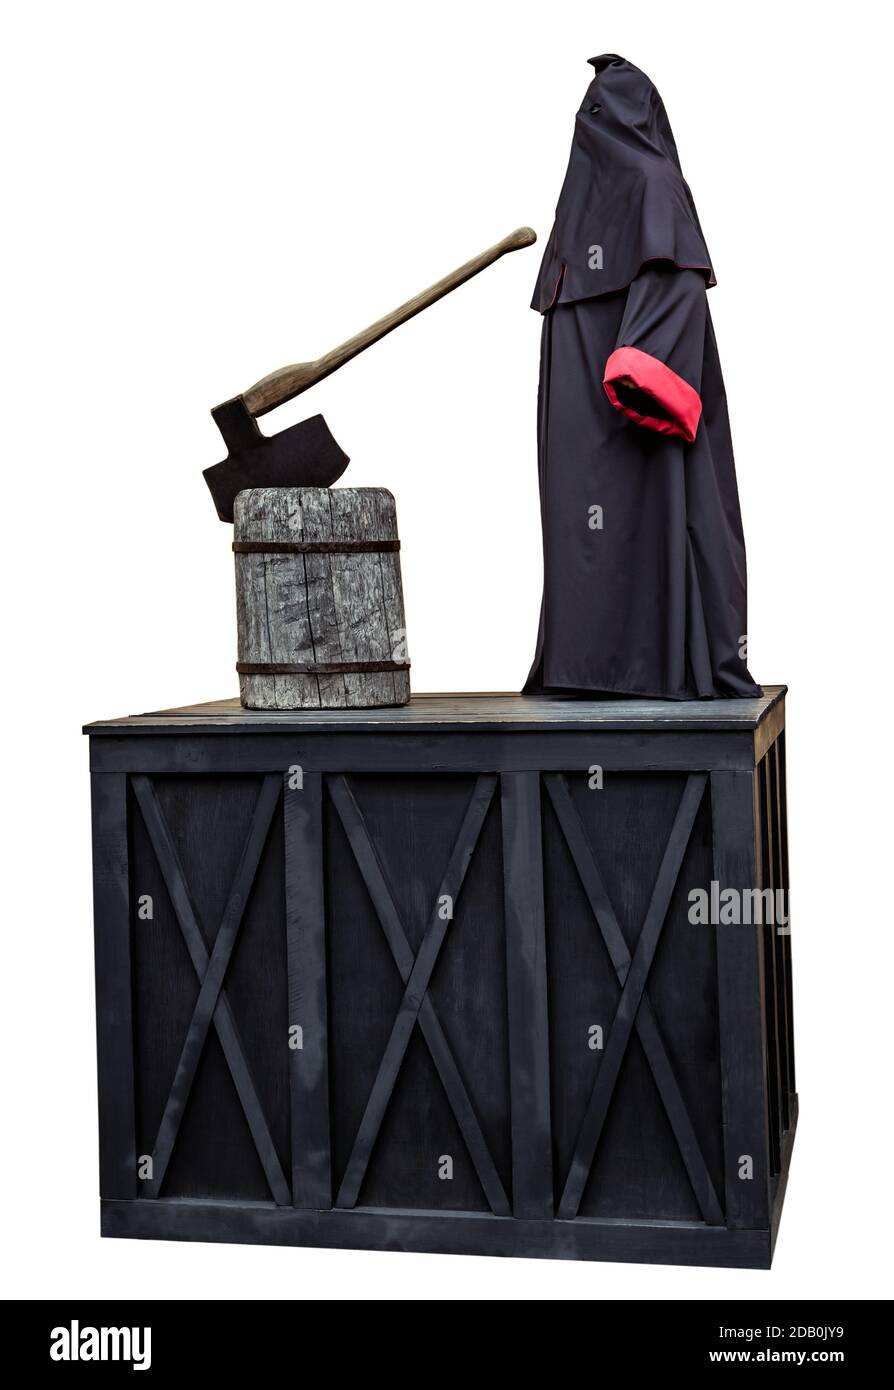 Executioner black mantle uniform hood isolated on white. Medieval public executioner at place of separation of the head from the body beheading with a Stock Photo